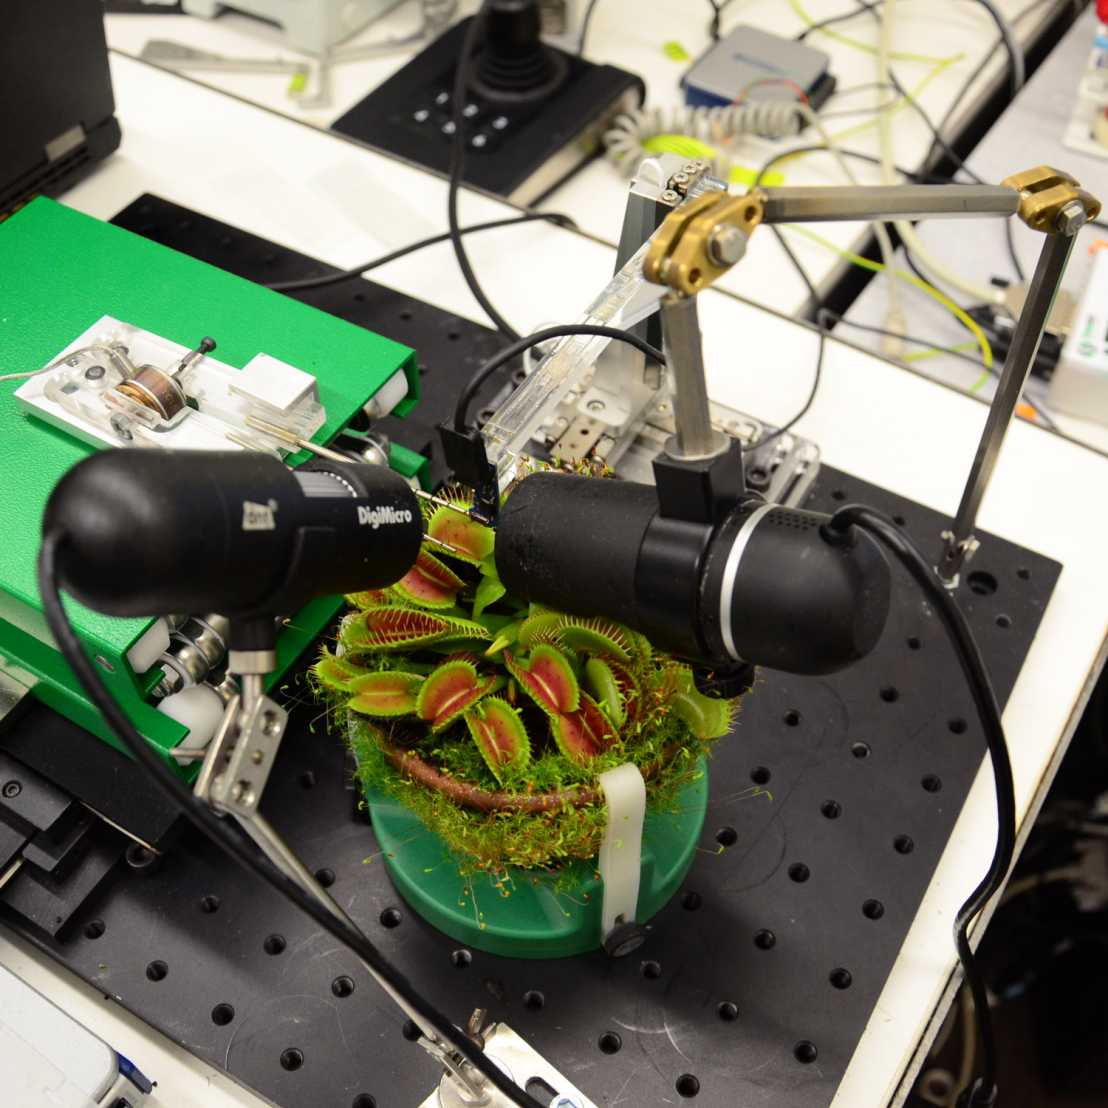 Enlarged view: Experimental set-up with Venus flytrap, two cameras, microrobotic system, and load cell.